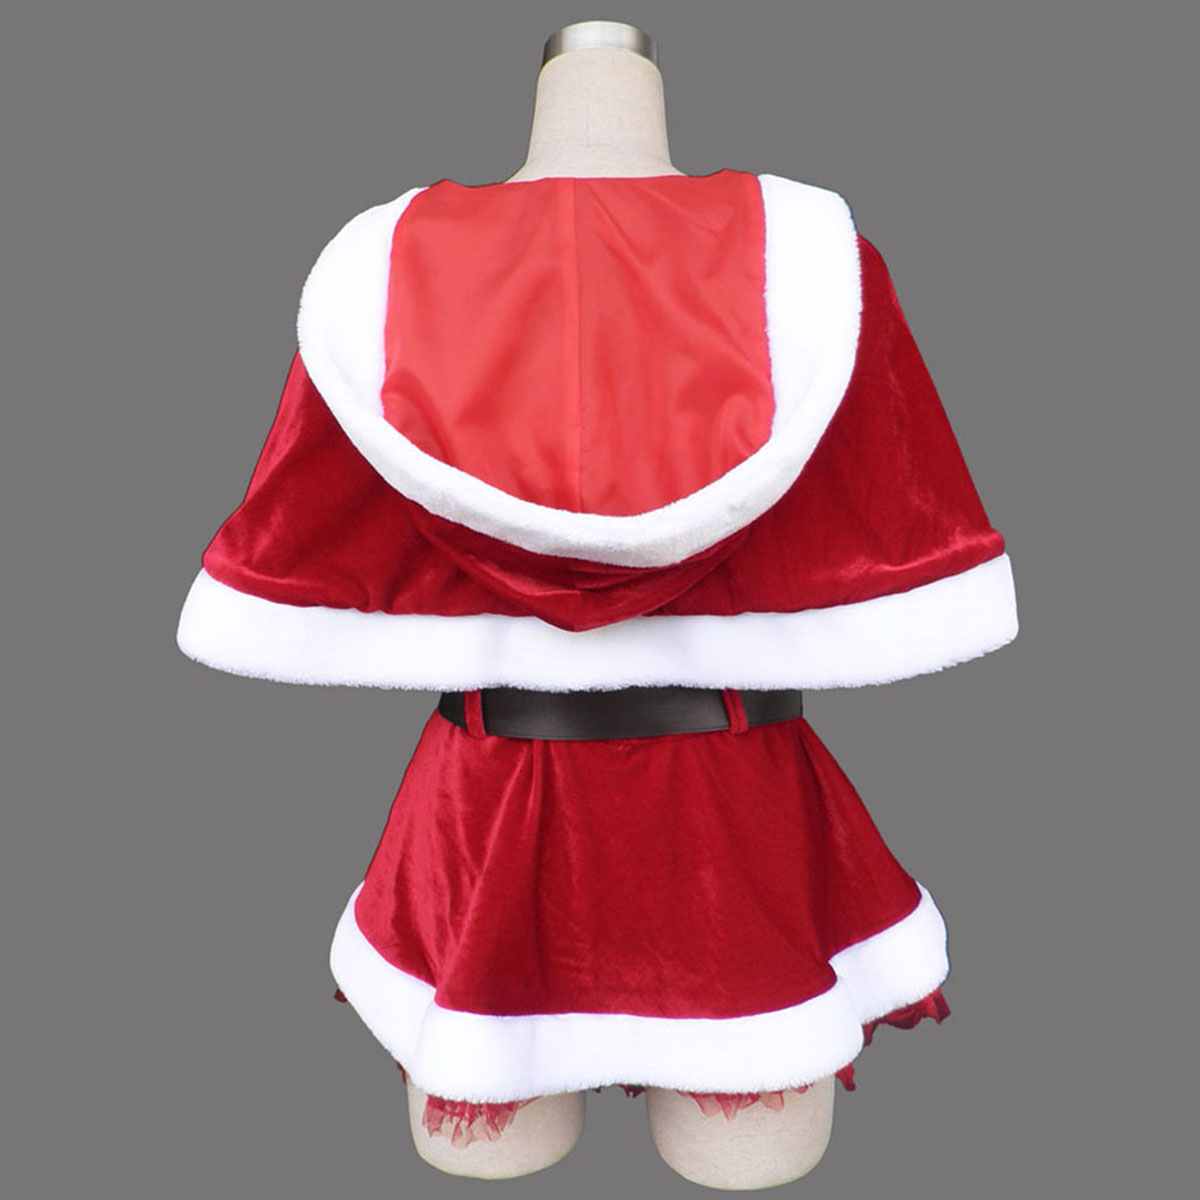 Red Christmas Lady Dress 5 Cosplay Costumes AU